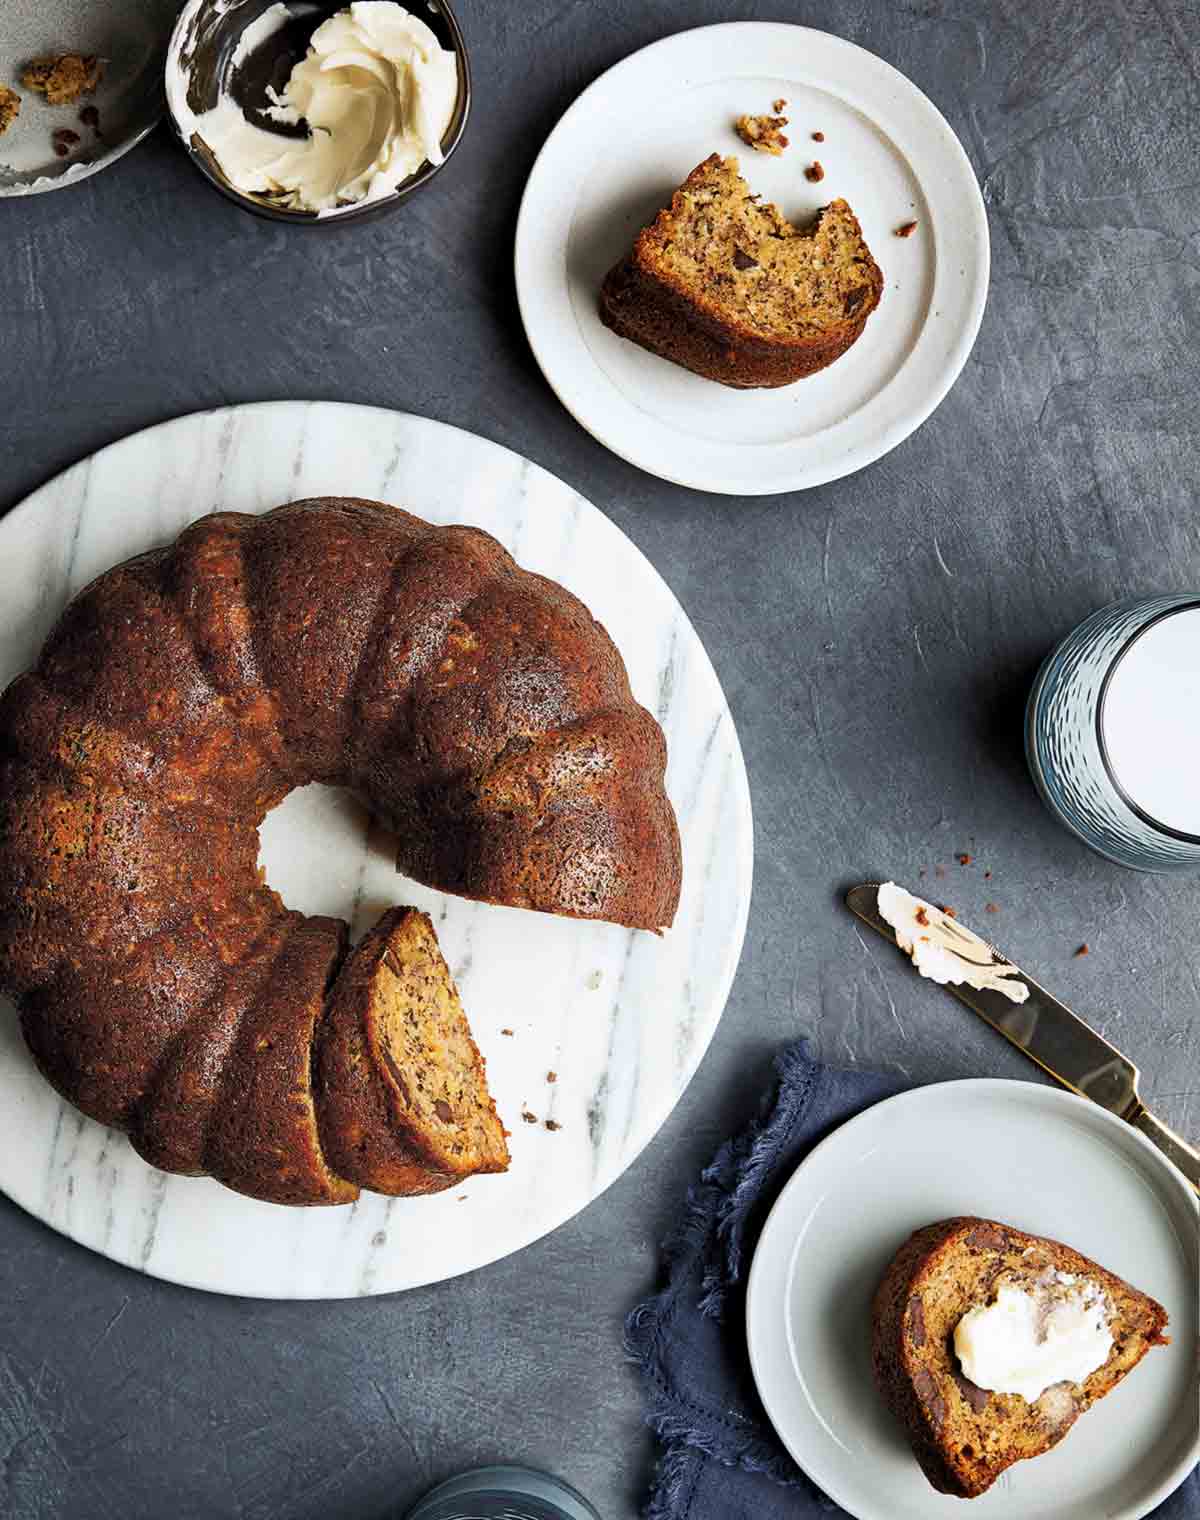 A Bundt banana bread on a white serving platter and individual slices on two plates.